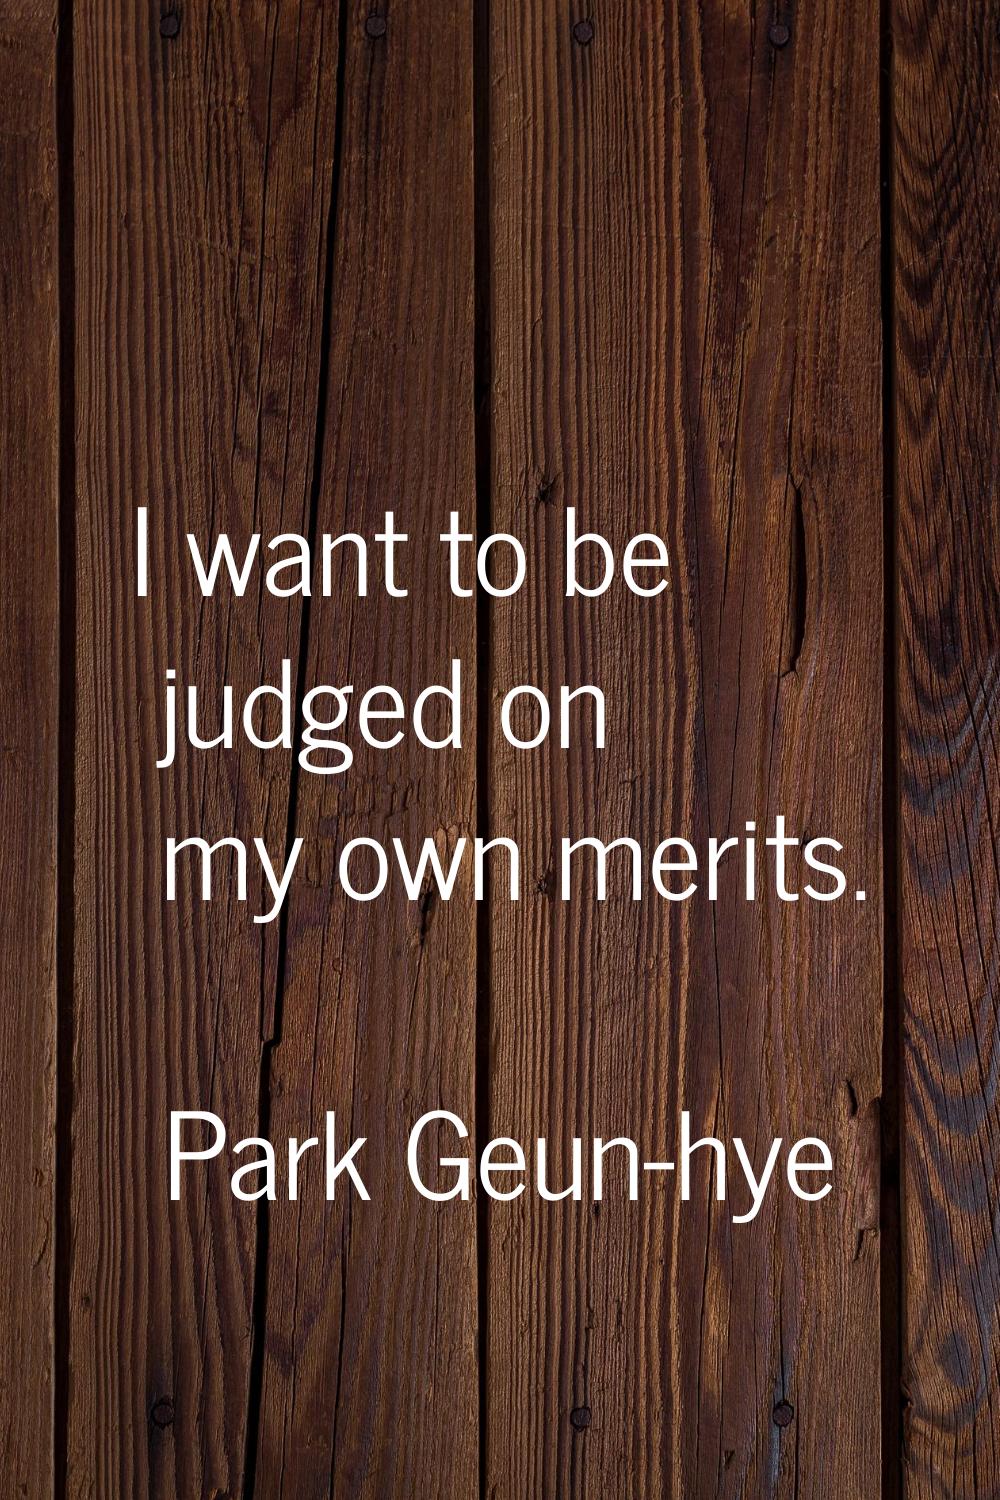 I want to be judged on my own merits.